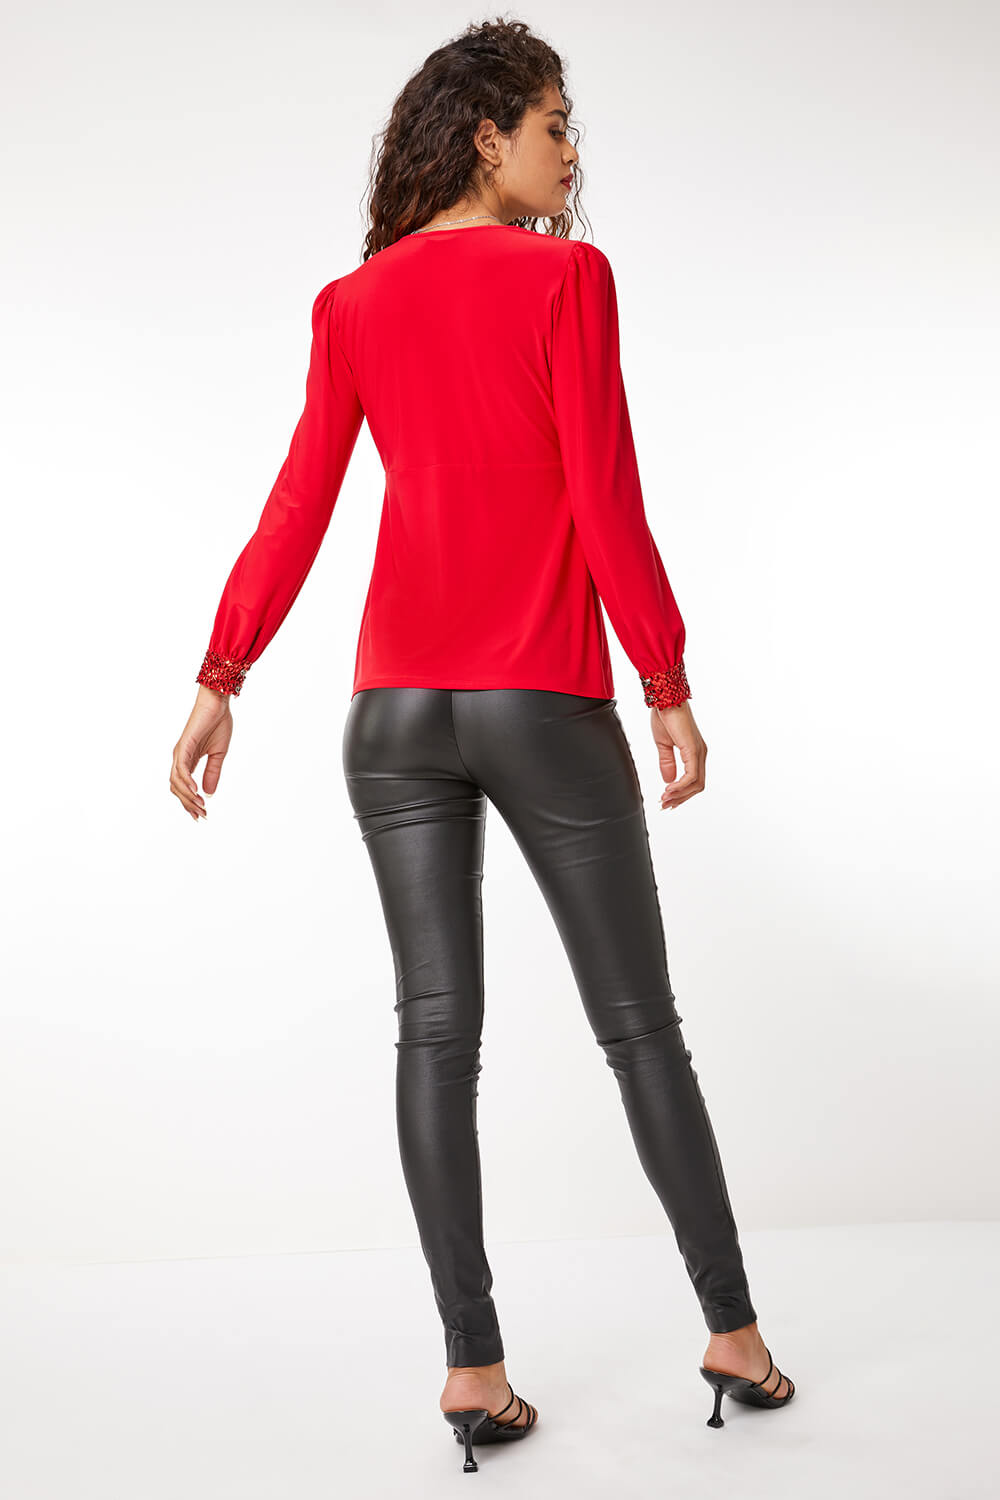 Red Sequin Trim Stretch Top, Image 3 of 5